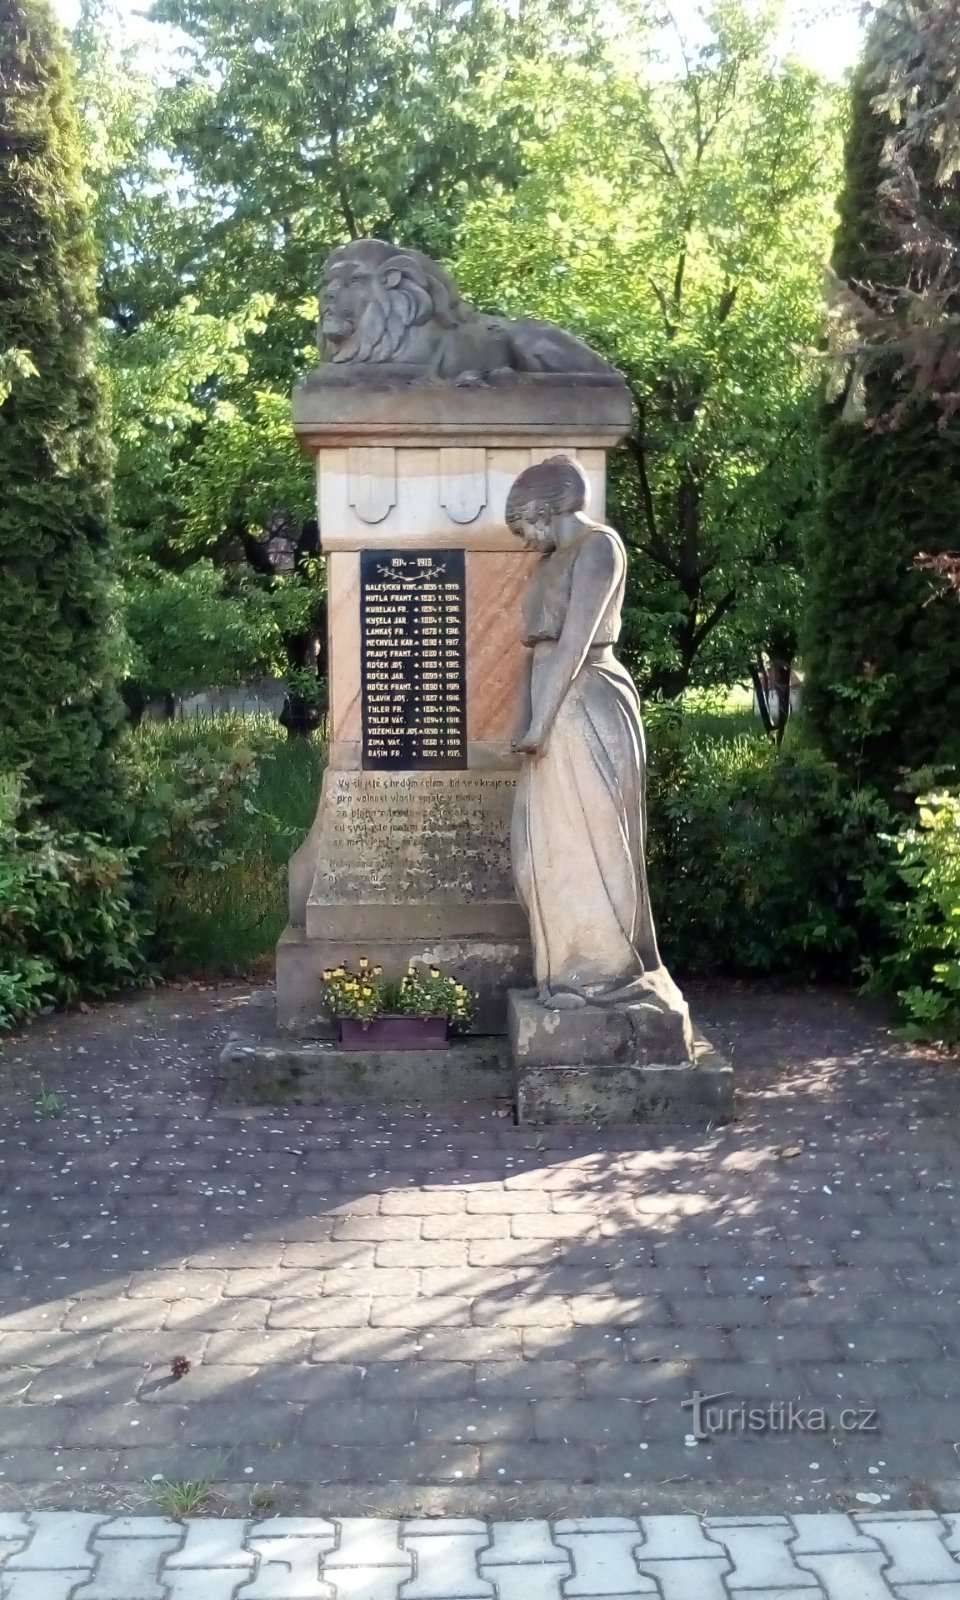 Monument to the fallen in Barchov